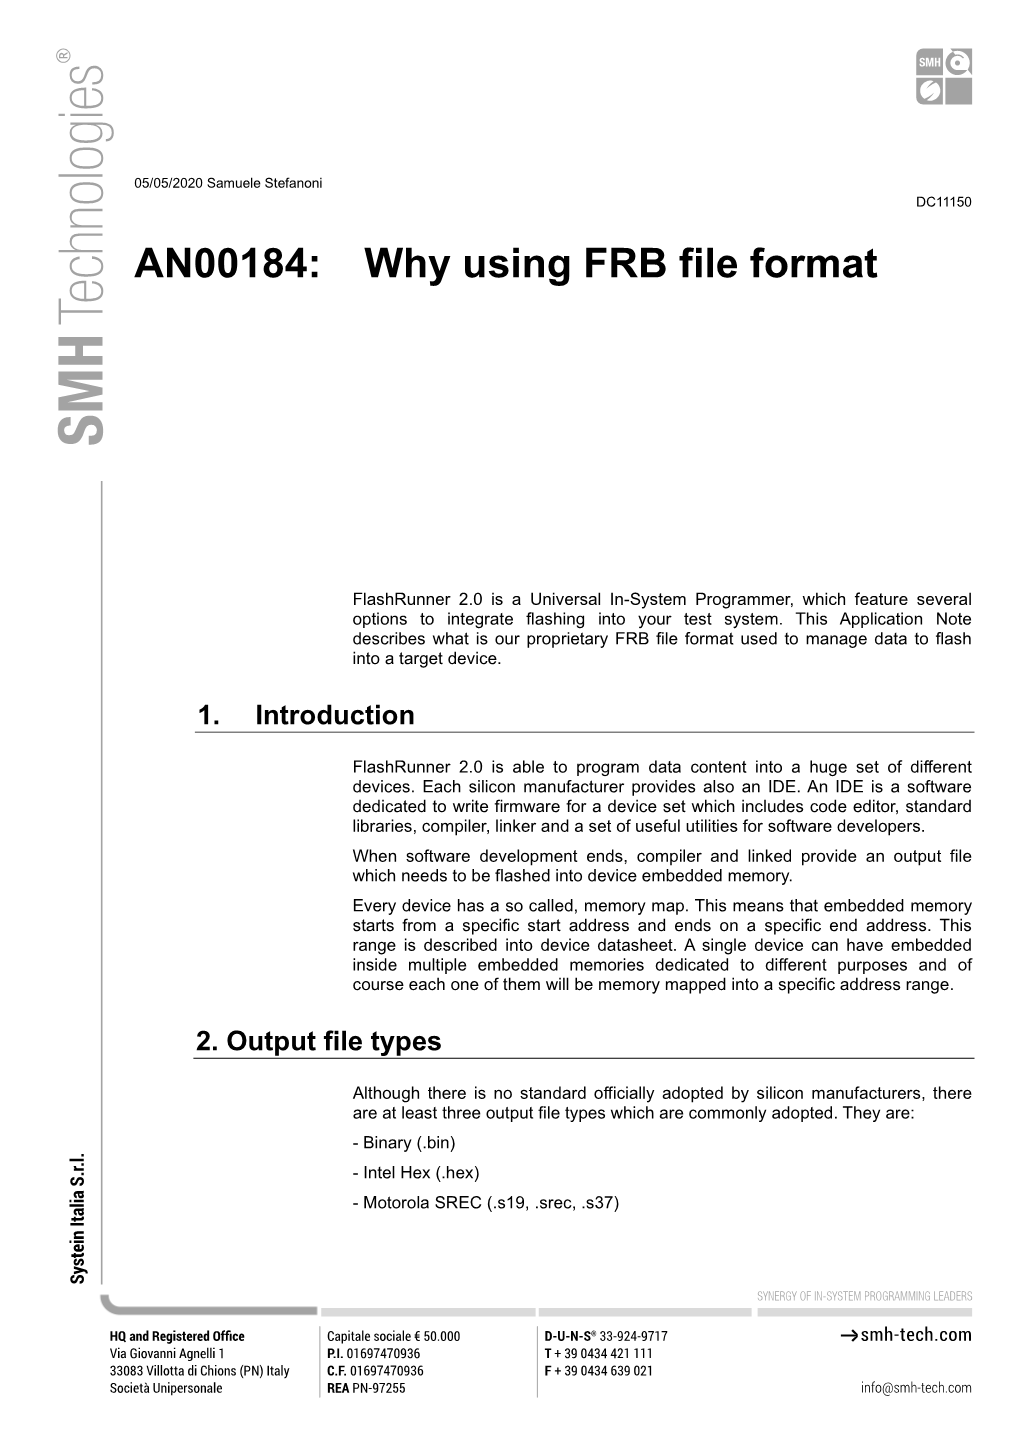 AN00184: Why Using FRB File Format